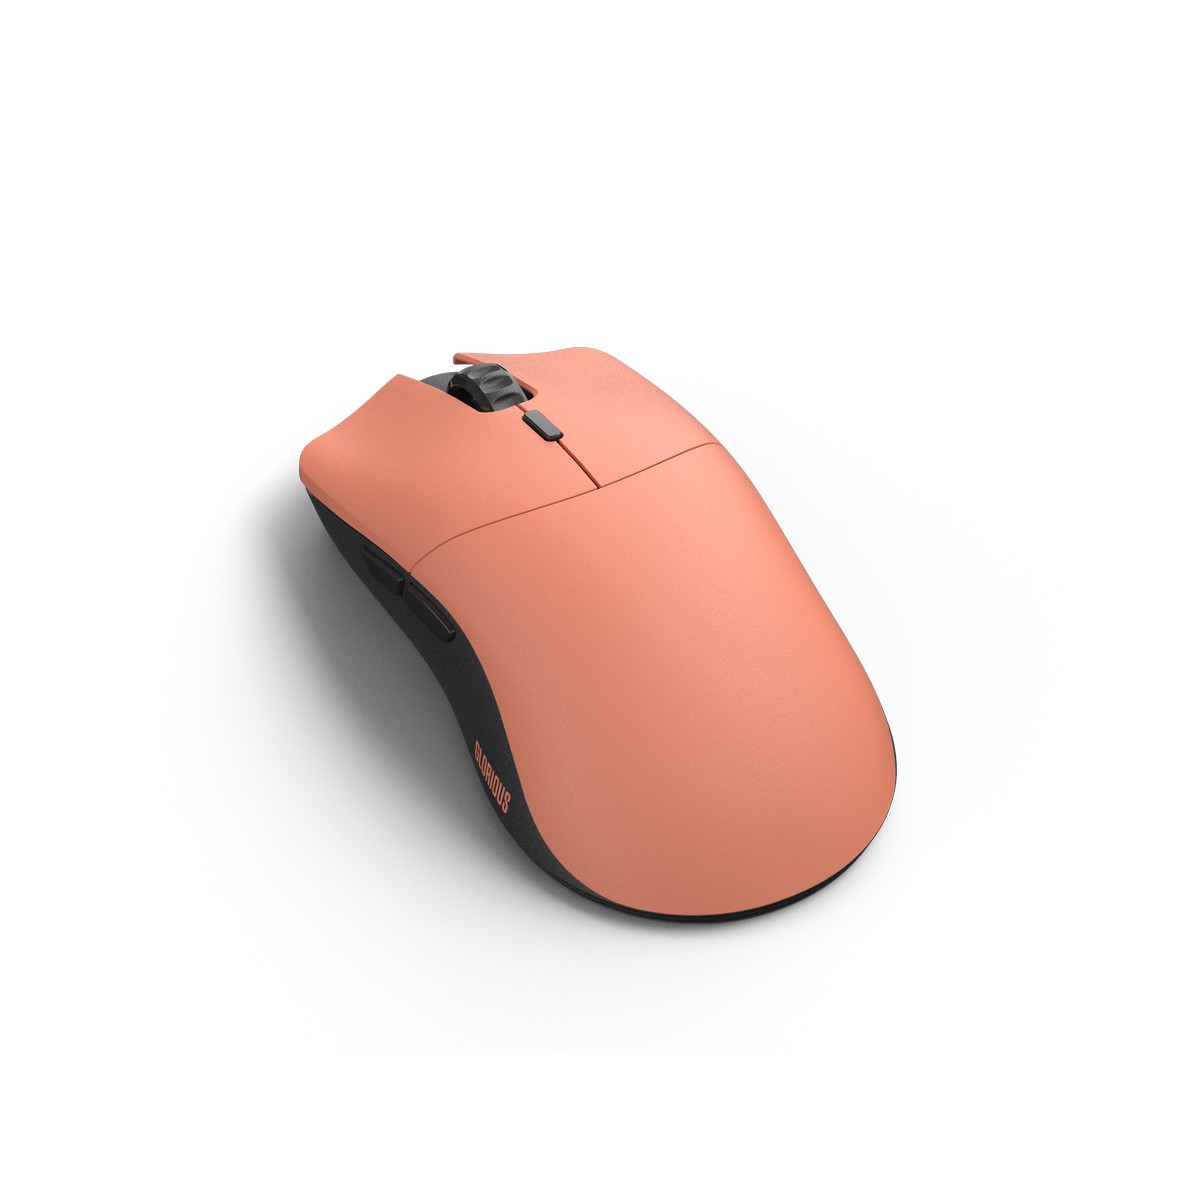 Glorious - Glorious Model O PRO Wireless Optical Gaming Mouse - Red Fox (GLO-MS-OW-RF-FORGE)